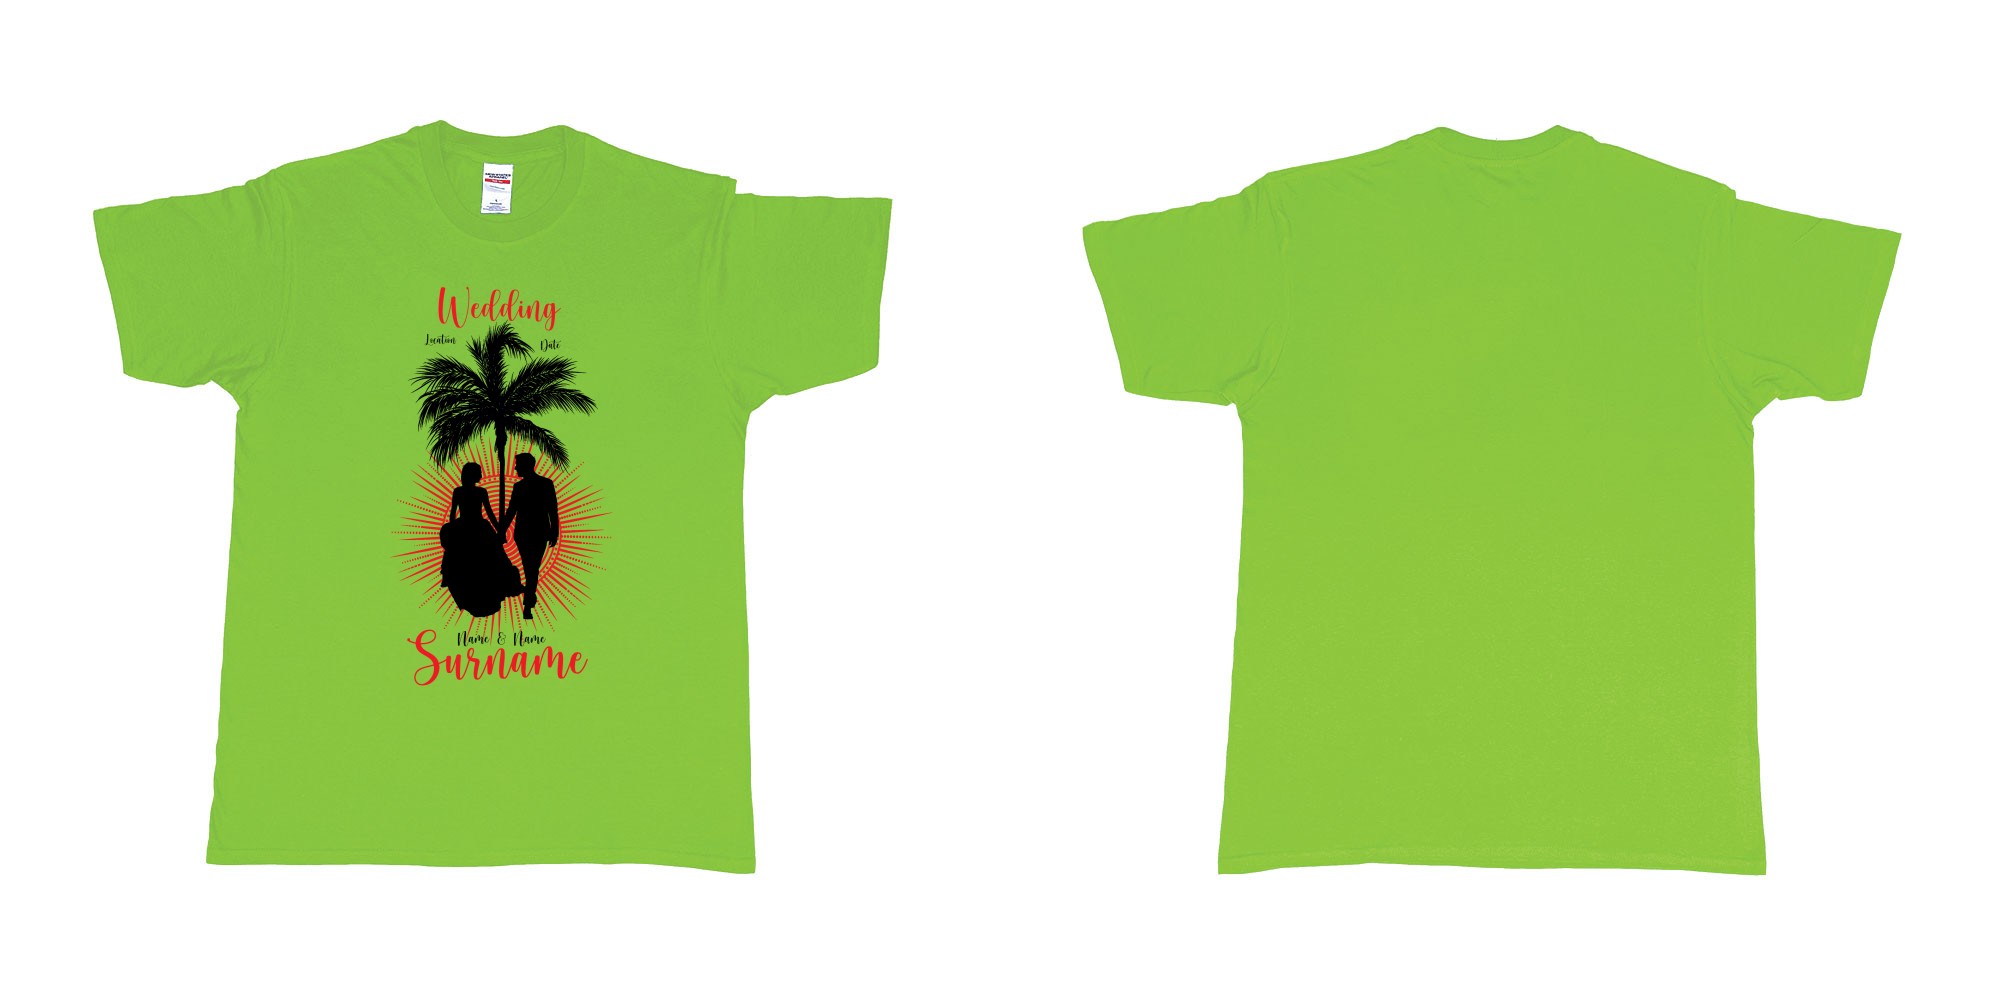 Custom tshirt design wedding palm sun bali in fabric color lime choice your own text made in Bali by The Pirate Way